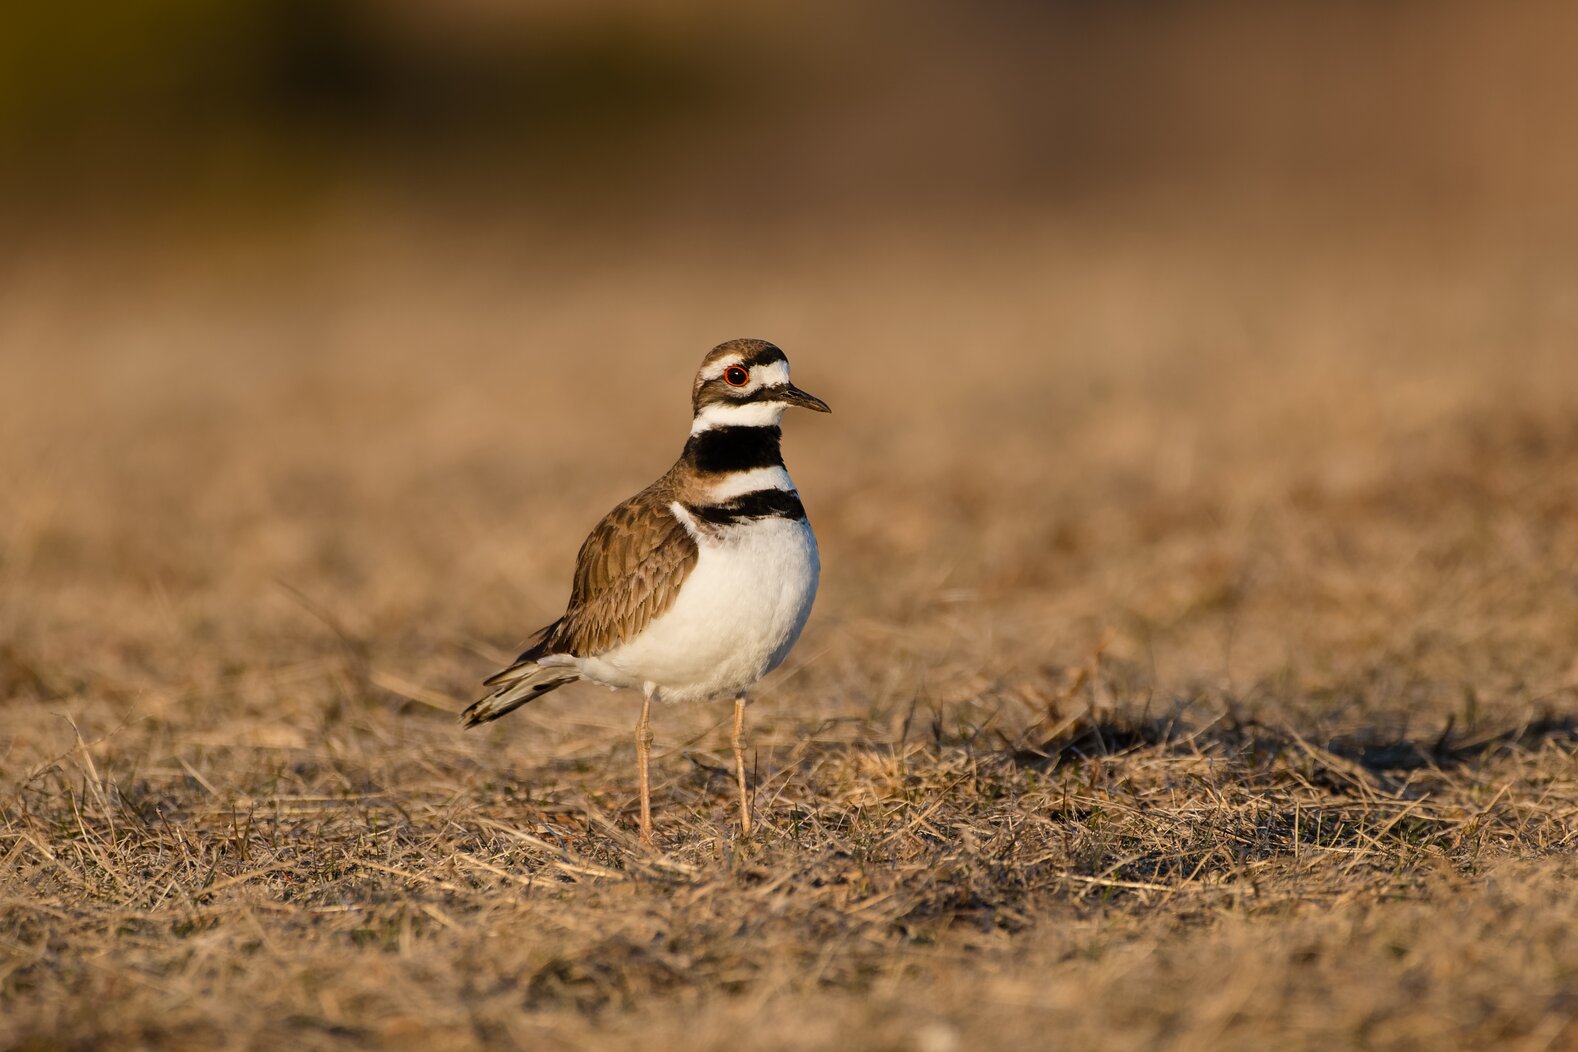 Killdeer may breed in the southeastern section of Governors Island. Photo: Carla Rhodes